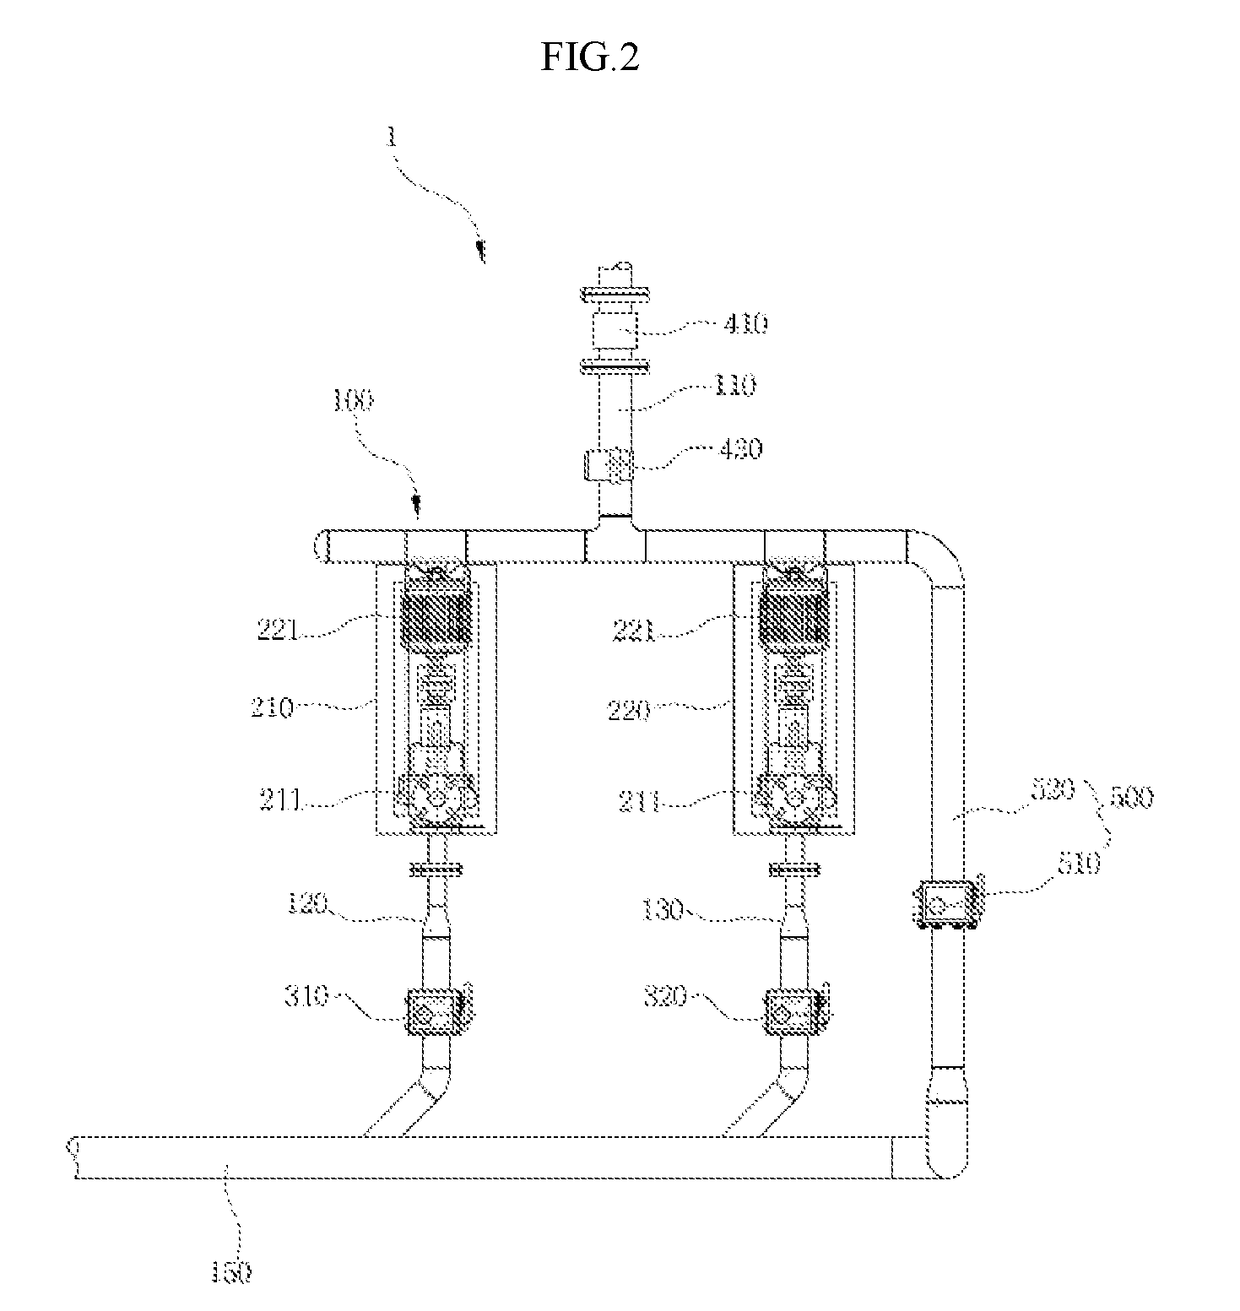 Stepwise operating parallel type small hydro power generation system having fixed flow path